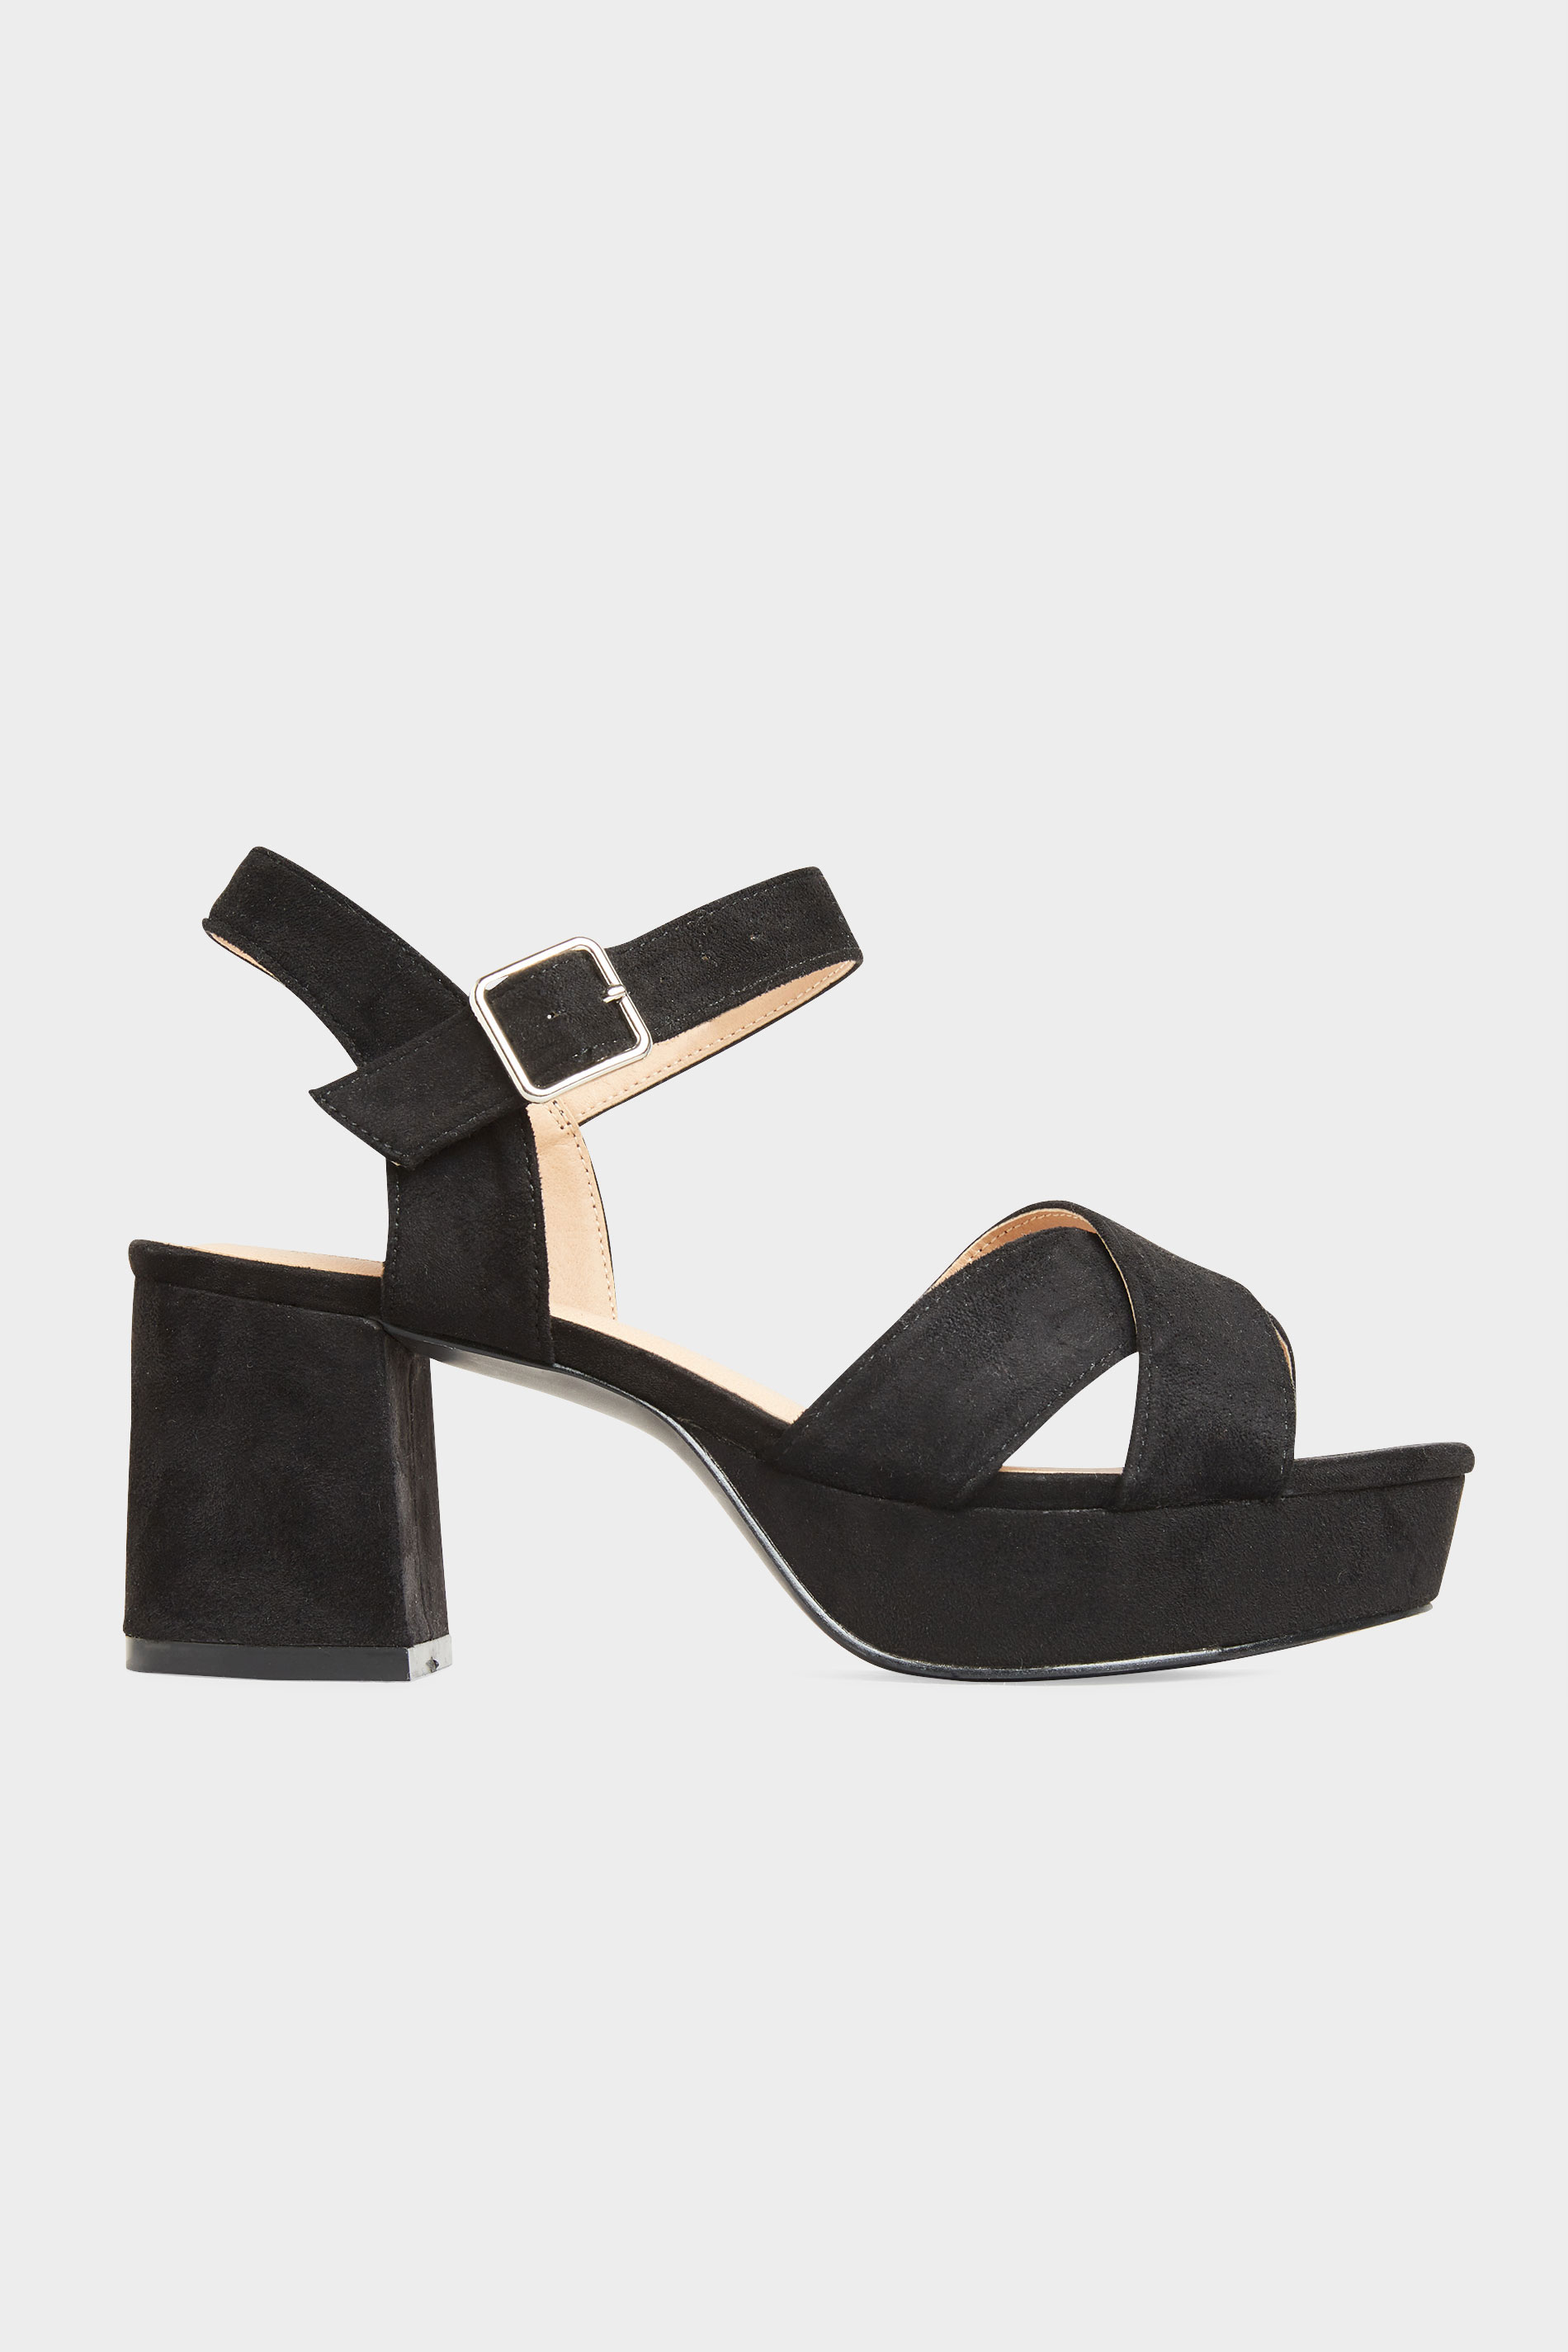 LIMITED COLLECTION Black Platform Sandal In Extra Wide Fit | Yours Clothing